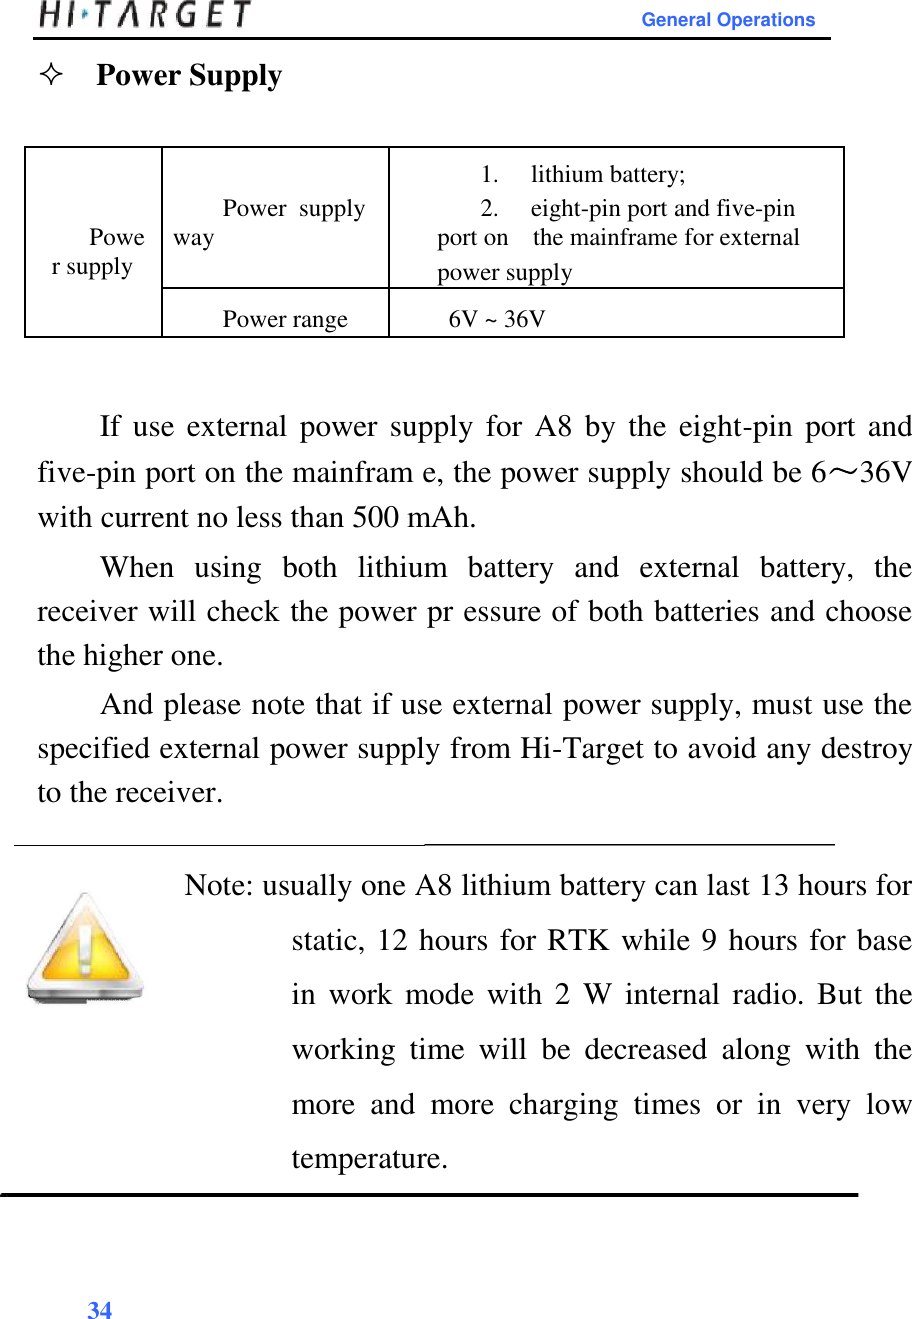        General Operations           Power Supply                     1. lithium battery;  Powe  Power  supply 2. eight-pin port and five-pin   way  port on  the mainframe for external   r supply    power supply         Power range 6V ~ 36V               If use external power supply for A8  by the eight-pin port  and five-pin port on the mainfram e, the power supply should be 6～36V with current no less than 500 mAh.  When  using  both  lithium  battery  and  external  battery,  the receiver will check the power pr essure of both batteries and choose the higher one.  And please note that if use external power supply, must use the specified external power supply from Hi-Target to avoid any destroy to the receiver.   Note: usually one A8 lithium battery can last 13 hours for static, 12 hours for RTK while 9 hours for base in  work  mode  with  2 W  internal radio.  But  the working  time  will  be  decreased  along  with  the more  and  more  charging  times  or  in  very  low temperature.     34   